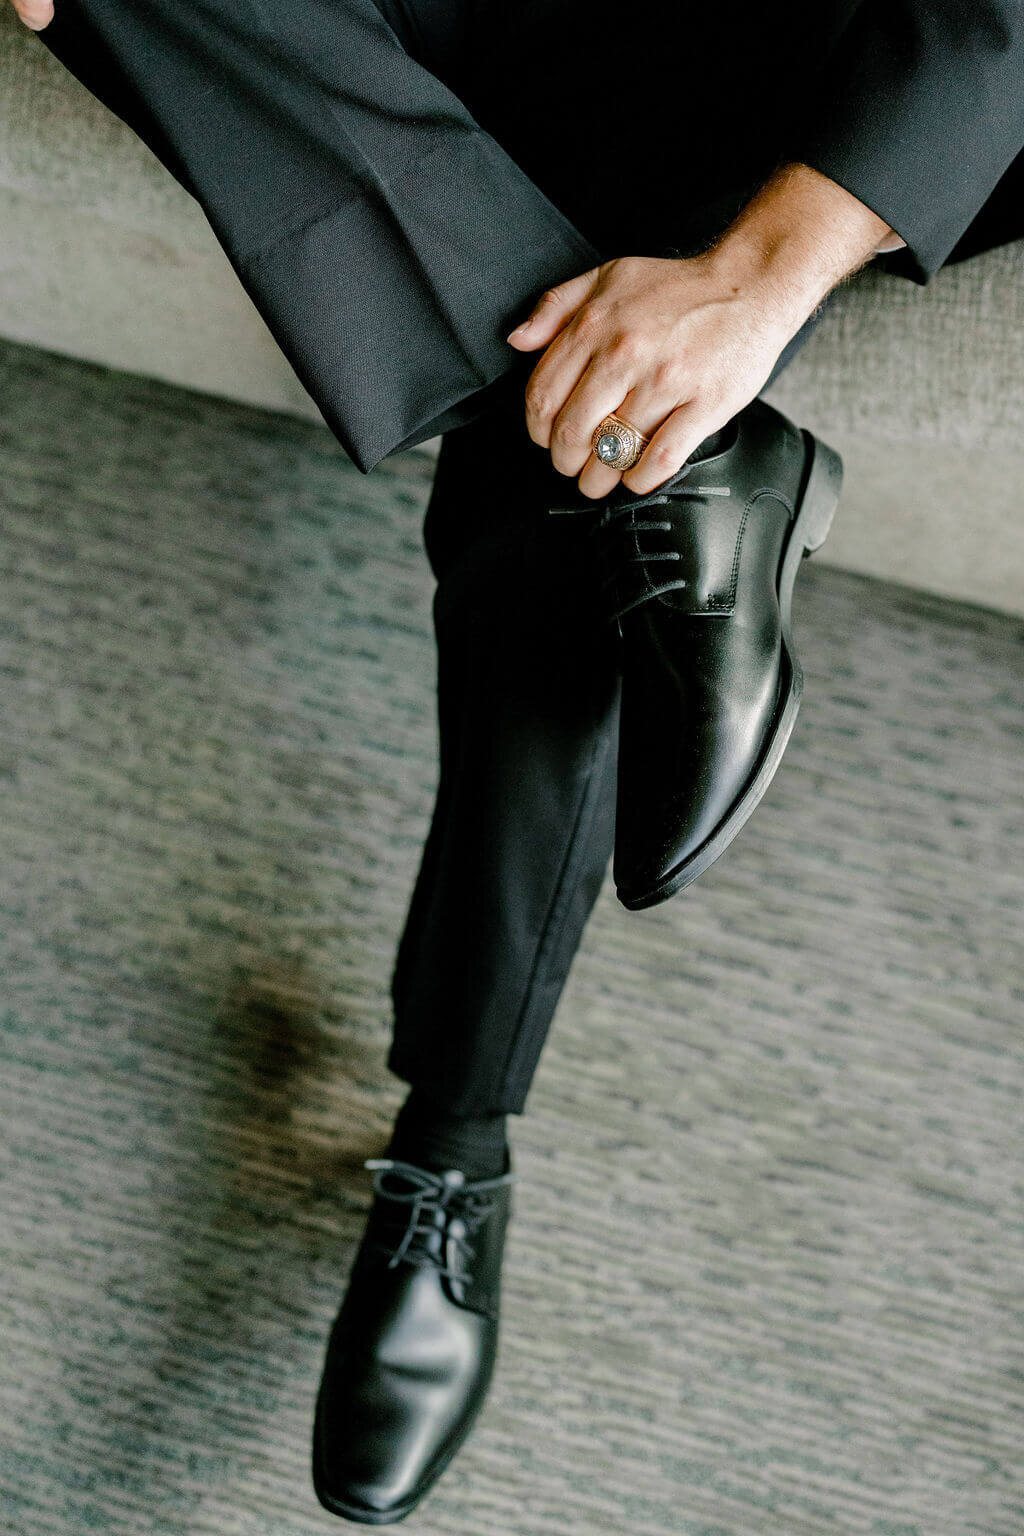 Detailed, close up photo of groom's shoes and family ring during getting ready photos